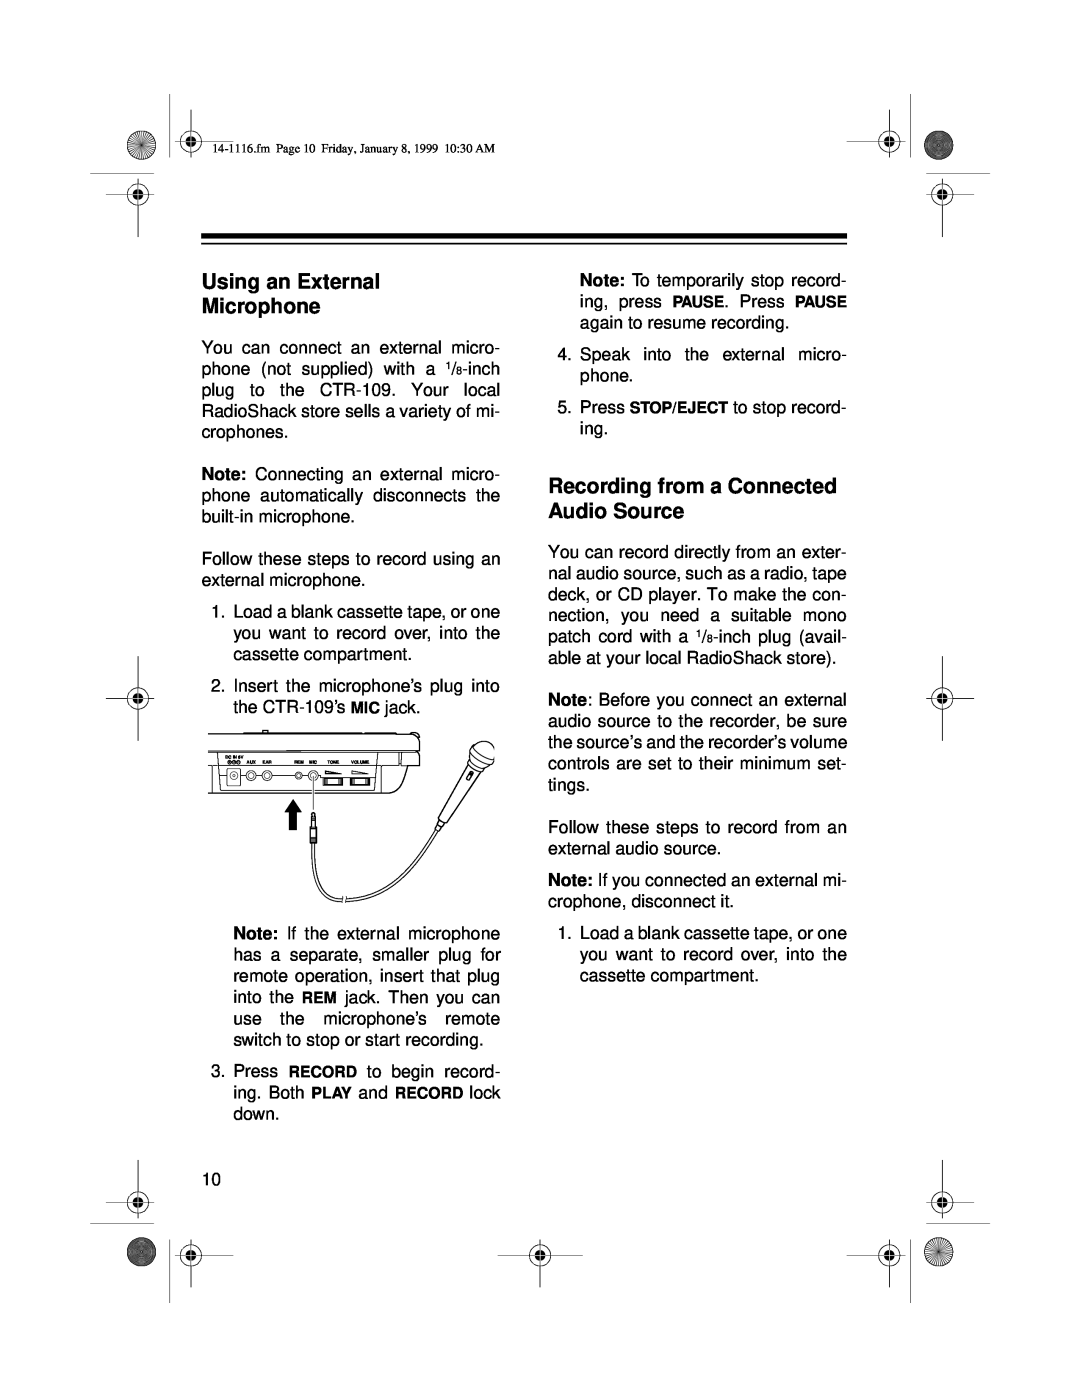 Optimus CTR-109 owner manual Using an External Microphone, Recording from a Connected Audio Source 